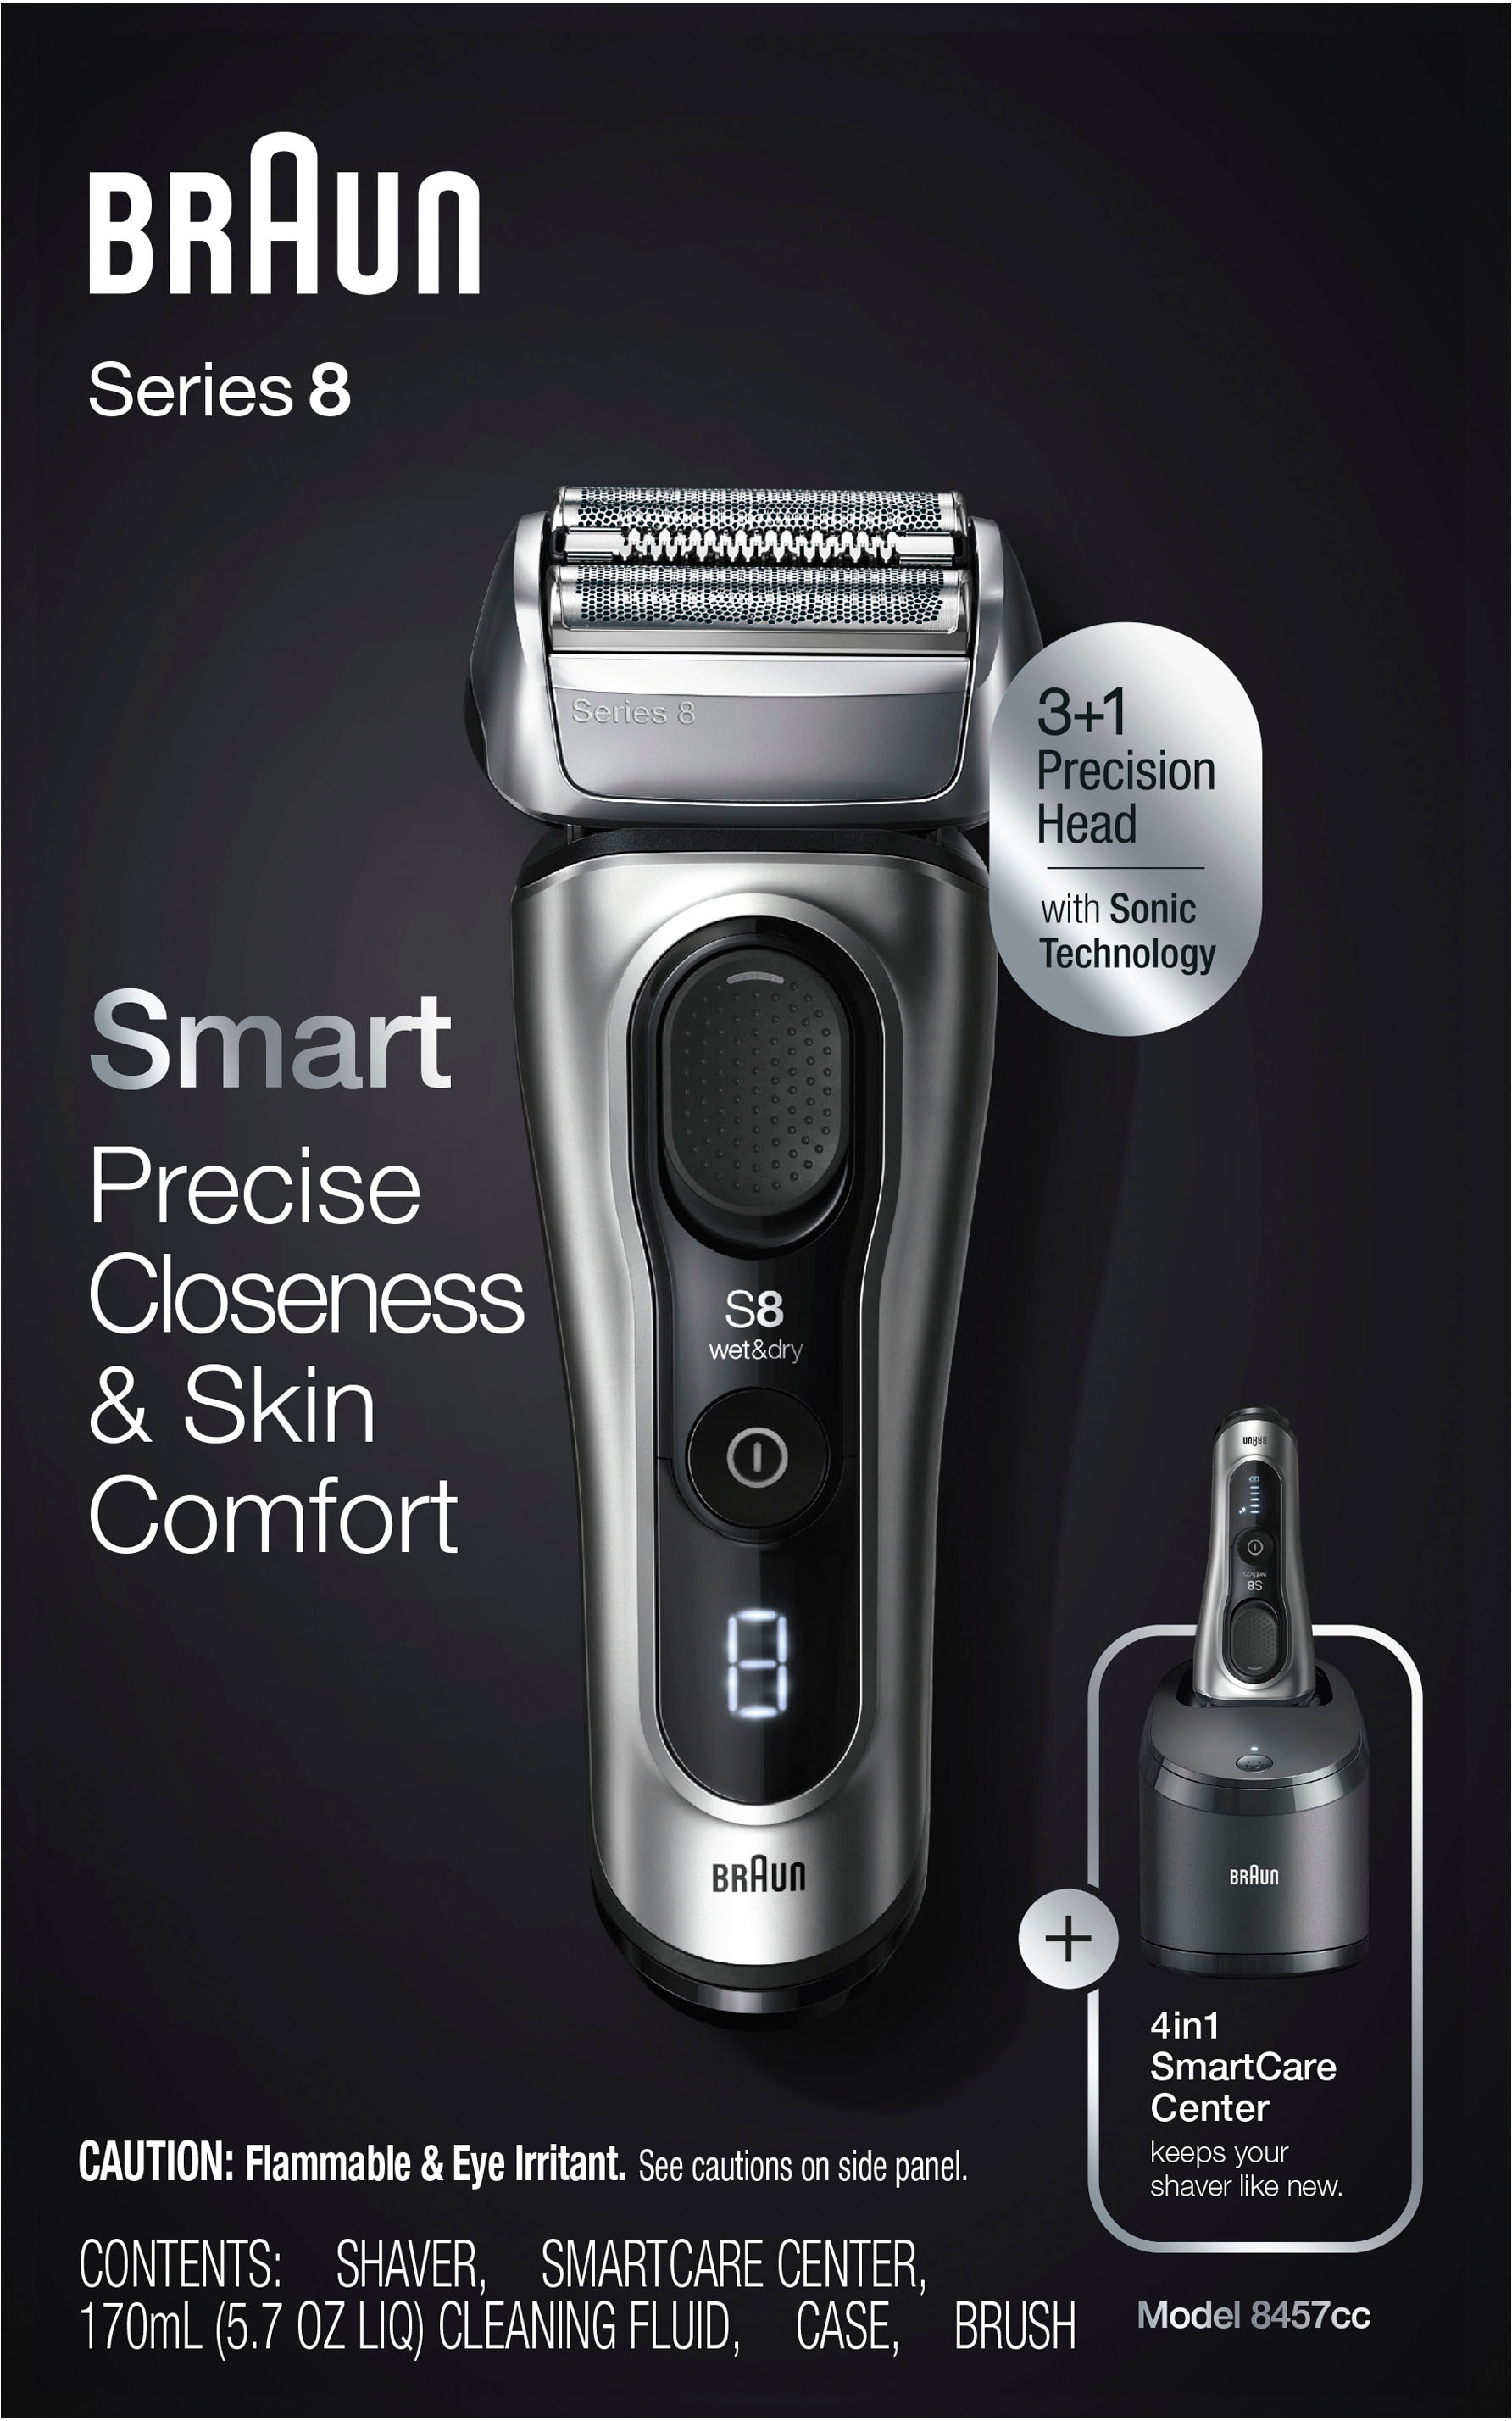 Braun Electric Razor for Men, Series 8457cc Electric Foil Shaver with Precision Beard Trimmer, Cleaning ＆ Charging SmartCare Center, Galvano Silver